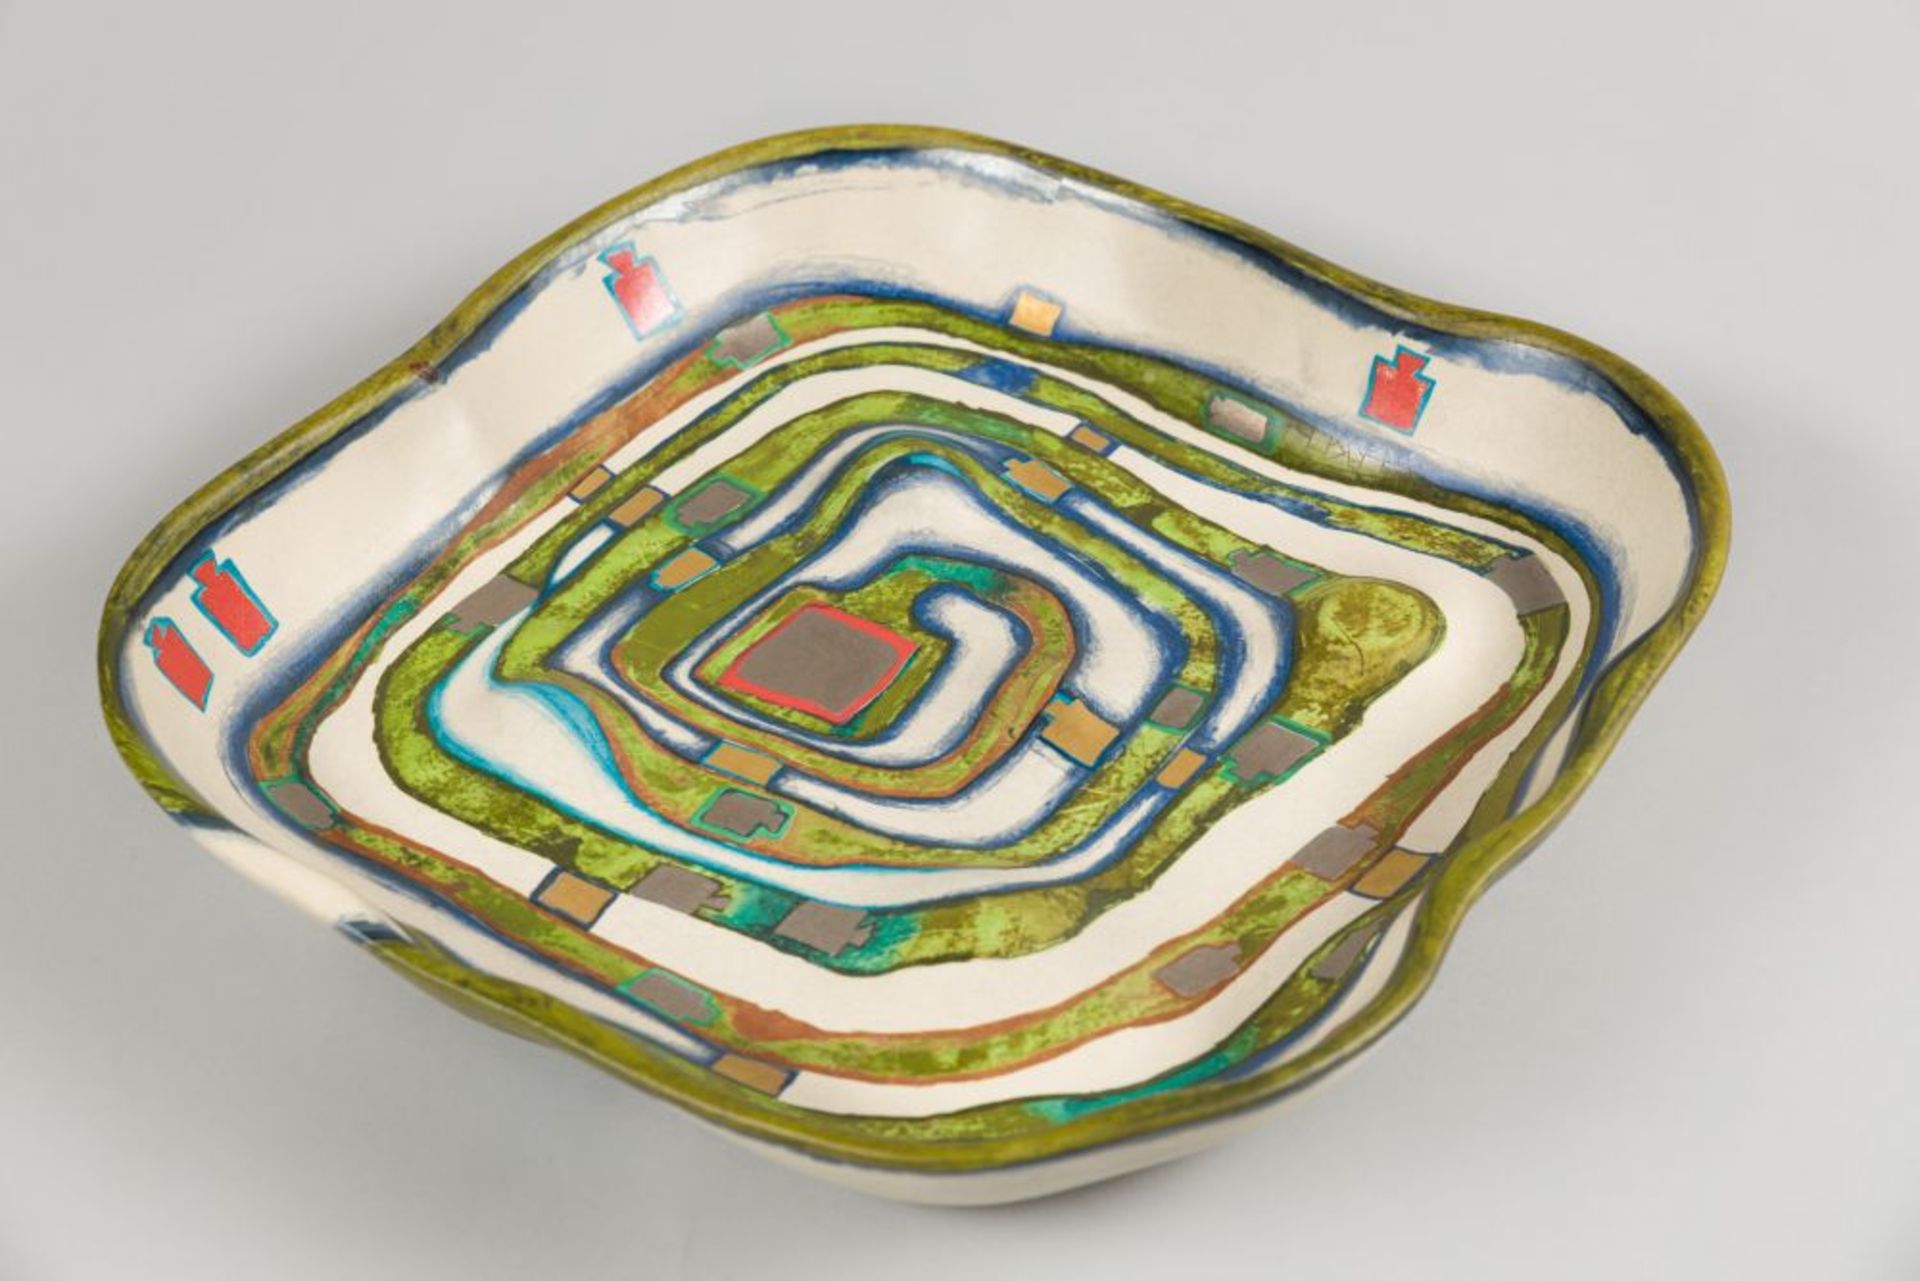 Spiralental, 1983 Ceramics Signed, dated, titled and numbered on the bottom: 634/2000 ca. 14,2 x - Image 9 of 12